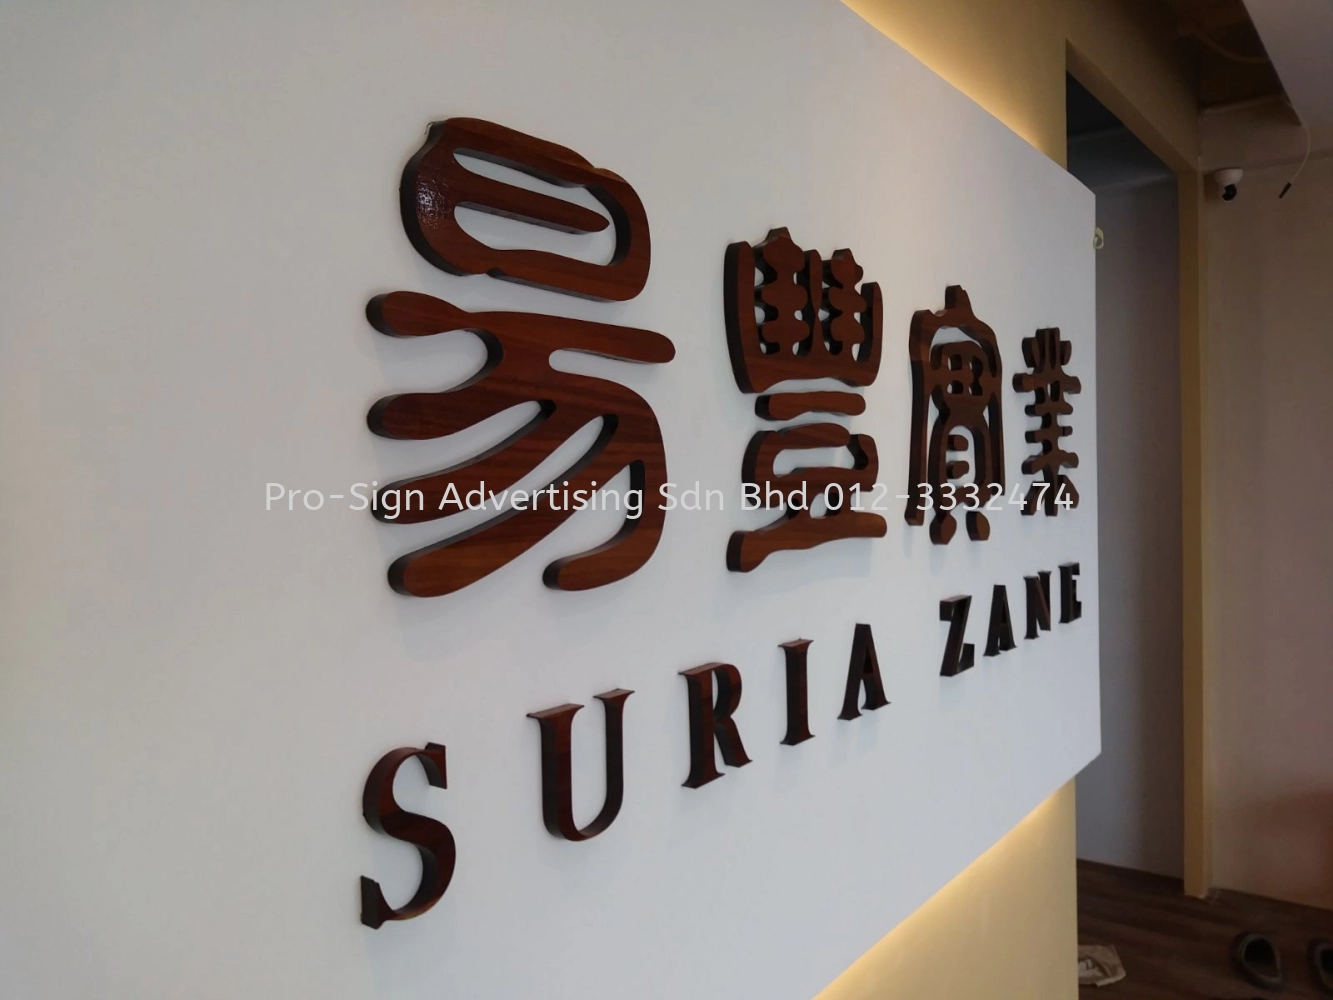 SOLID WOOD CUT OUT SIGNAGE (SURIA ZANE, KL, 2018)